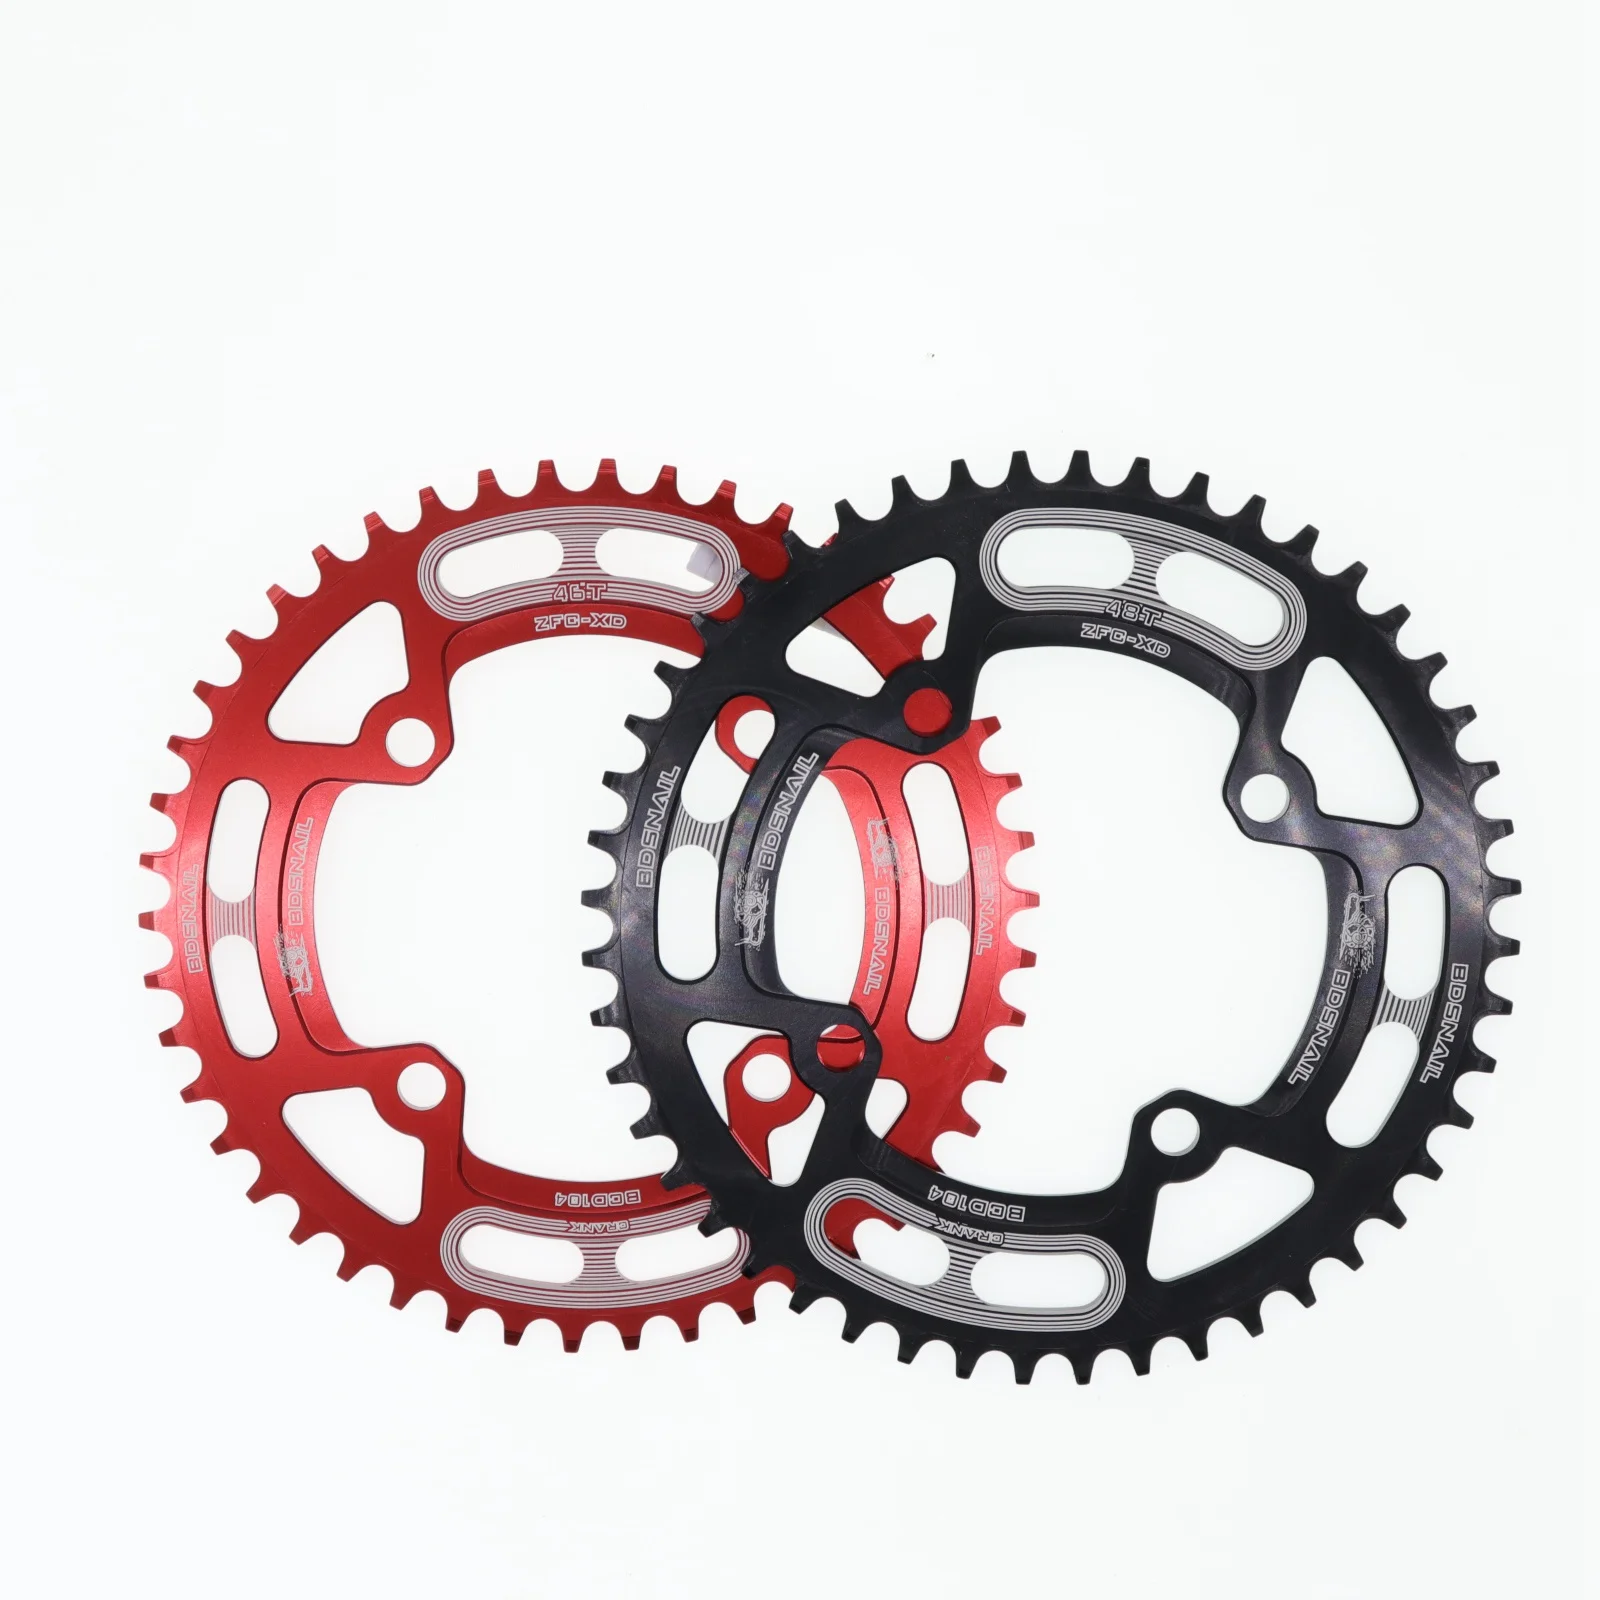 

SNAIL Chain ring 104 BCD round 30t 32t 34t 36t 38t 40t 42t 44t 46t 48t 50t 52t tooth single tooth plate MTB Mountain bike 104BCD, Black red